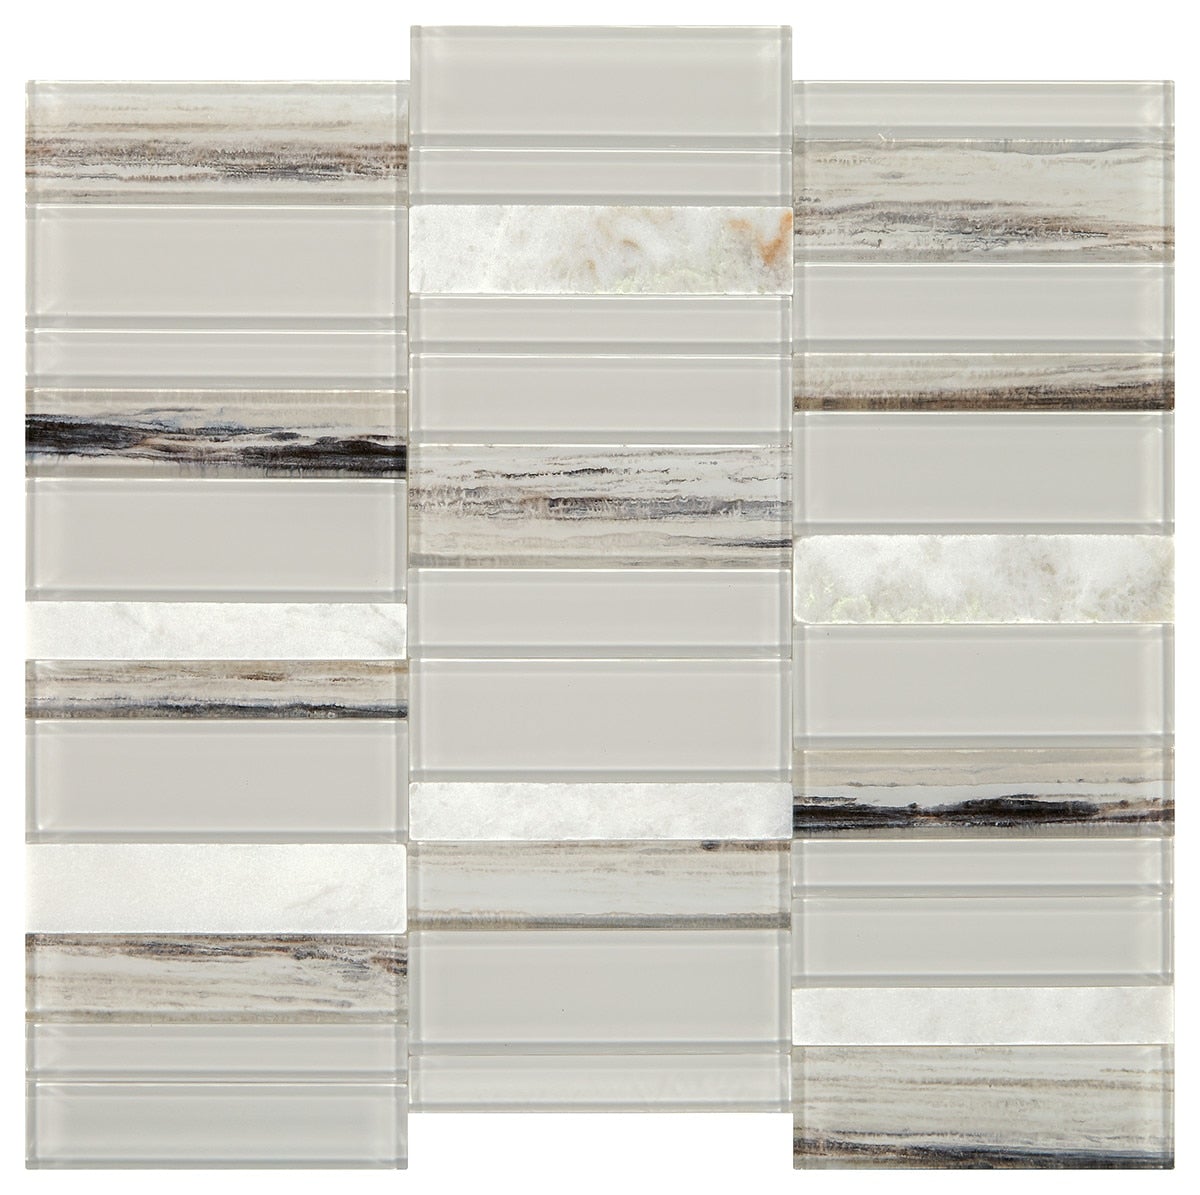 Daltile Simplystick Mosaix 11.81" x 11.81" Stormy Mist And Glass Blend Stone & Glass Mosaic